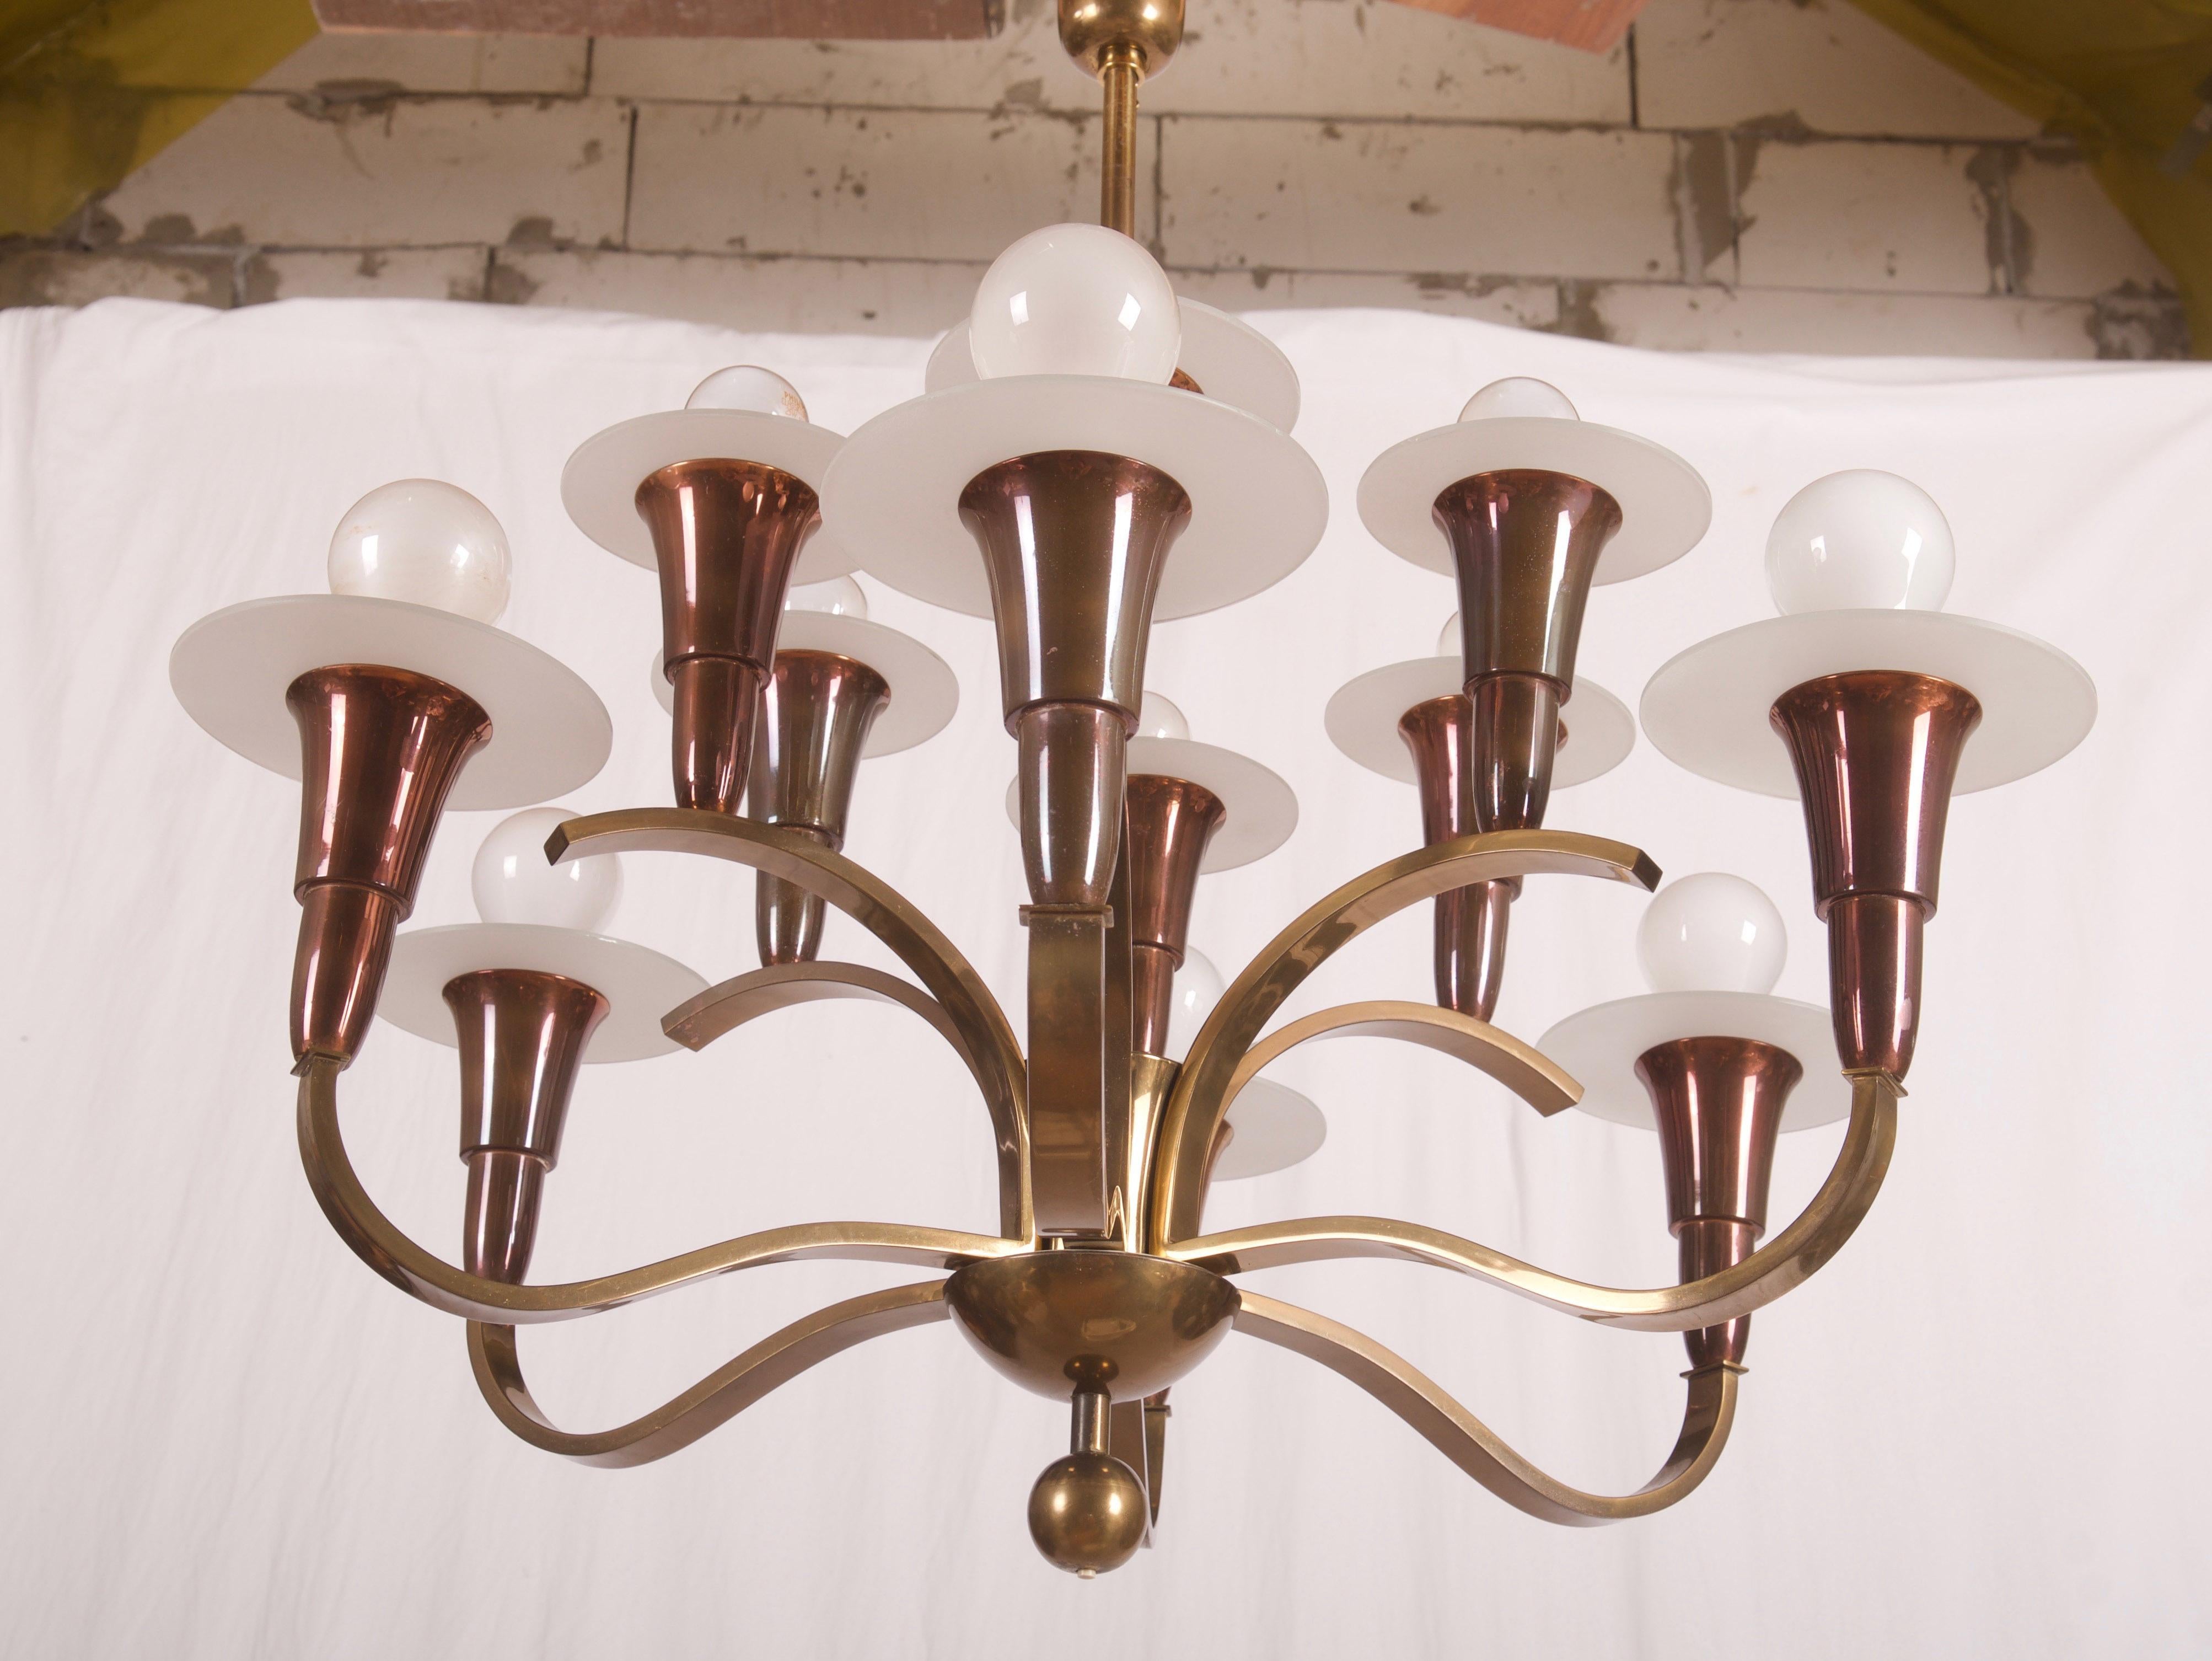 Brass construction with 12 arms fitted with E27 sockets, frosted glass shades.
Manufactured in the 1930s in Germany.
Original used condition with some patina on the steel parts.